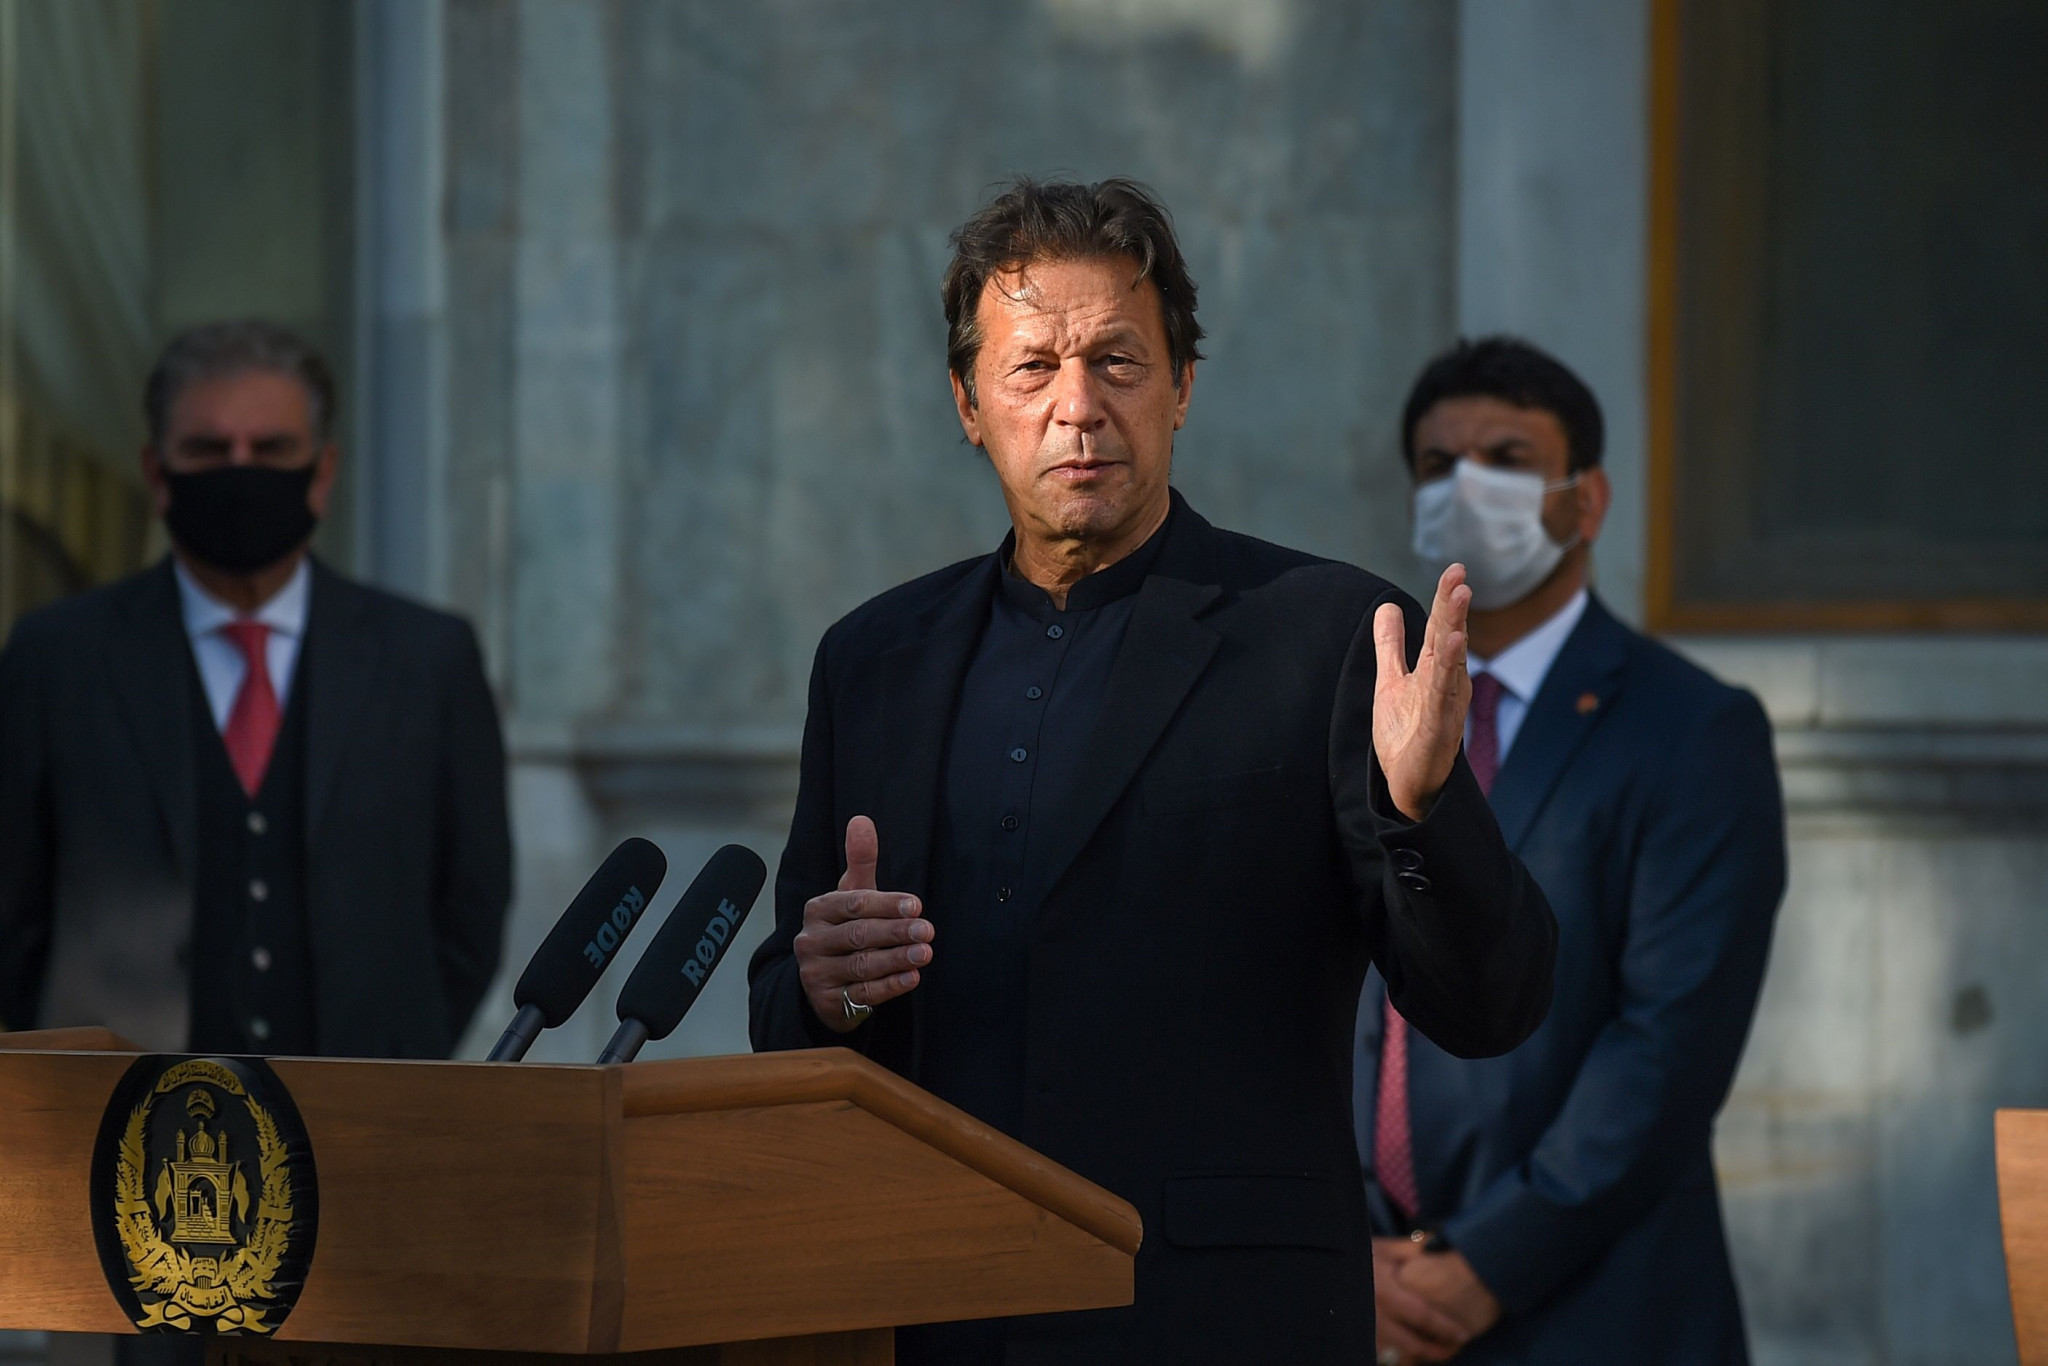 Pakistani Prime Minister Imran Khan "expressed solidarity" with China as he looks set to make a three-day visit to the hosts of the Winter Olympics ©Getty Images